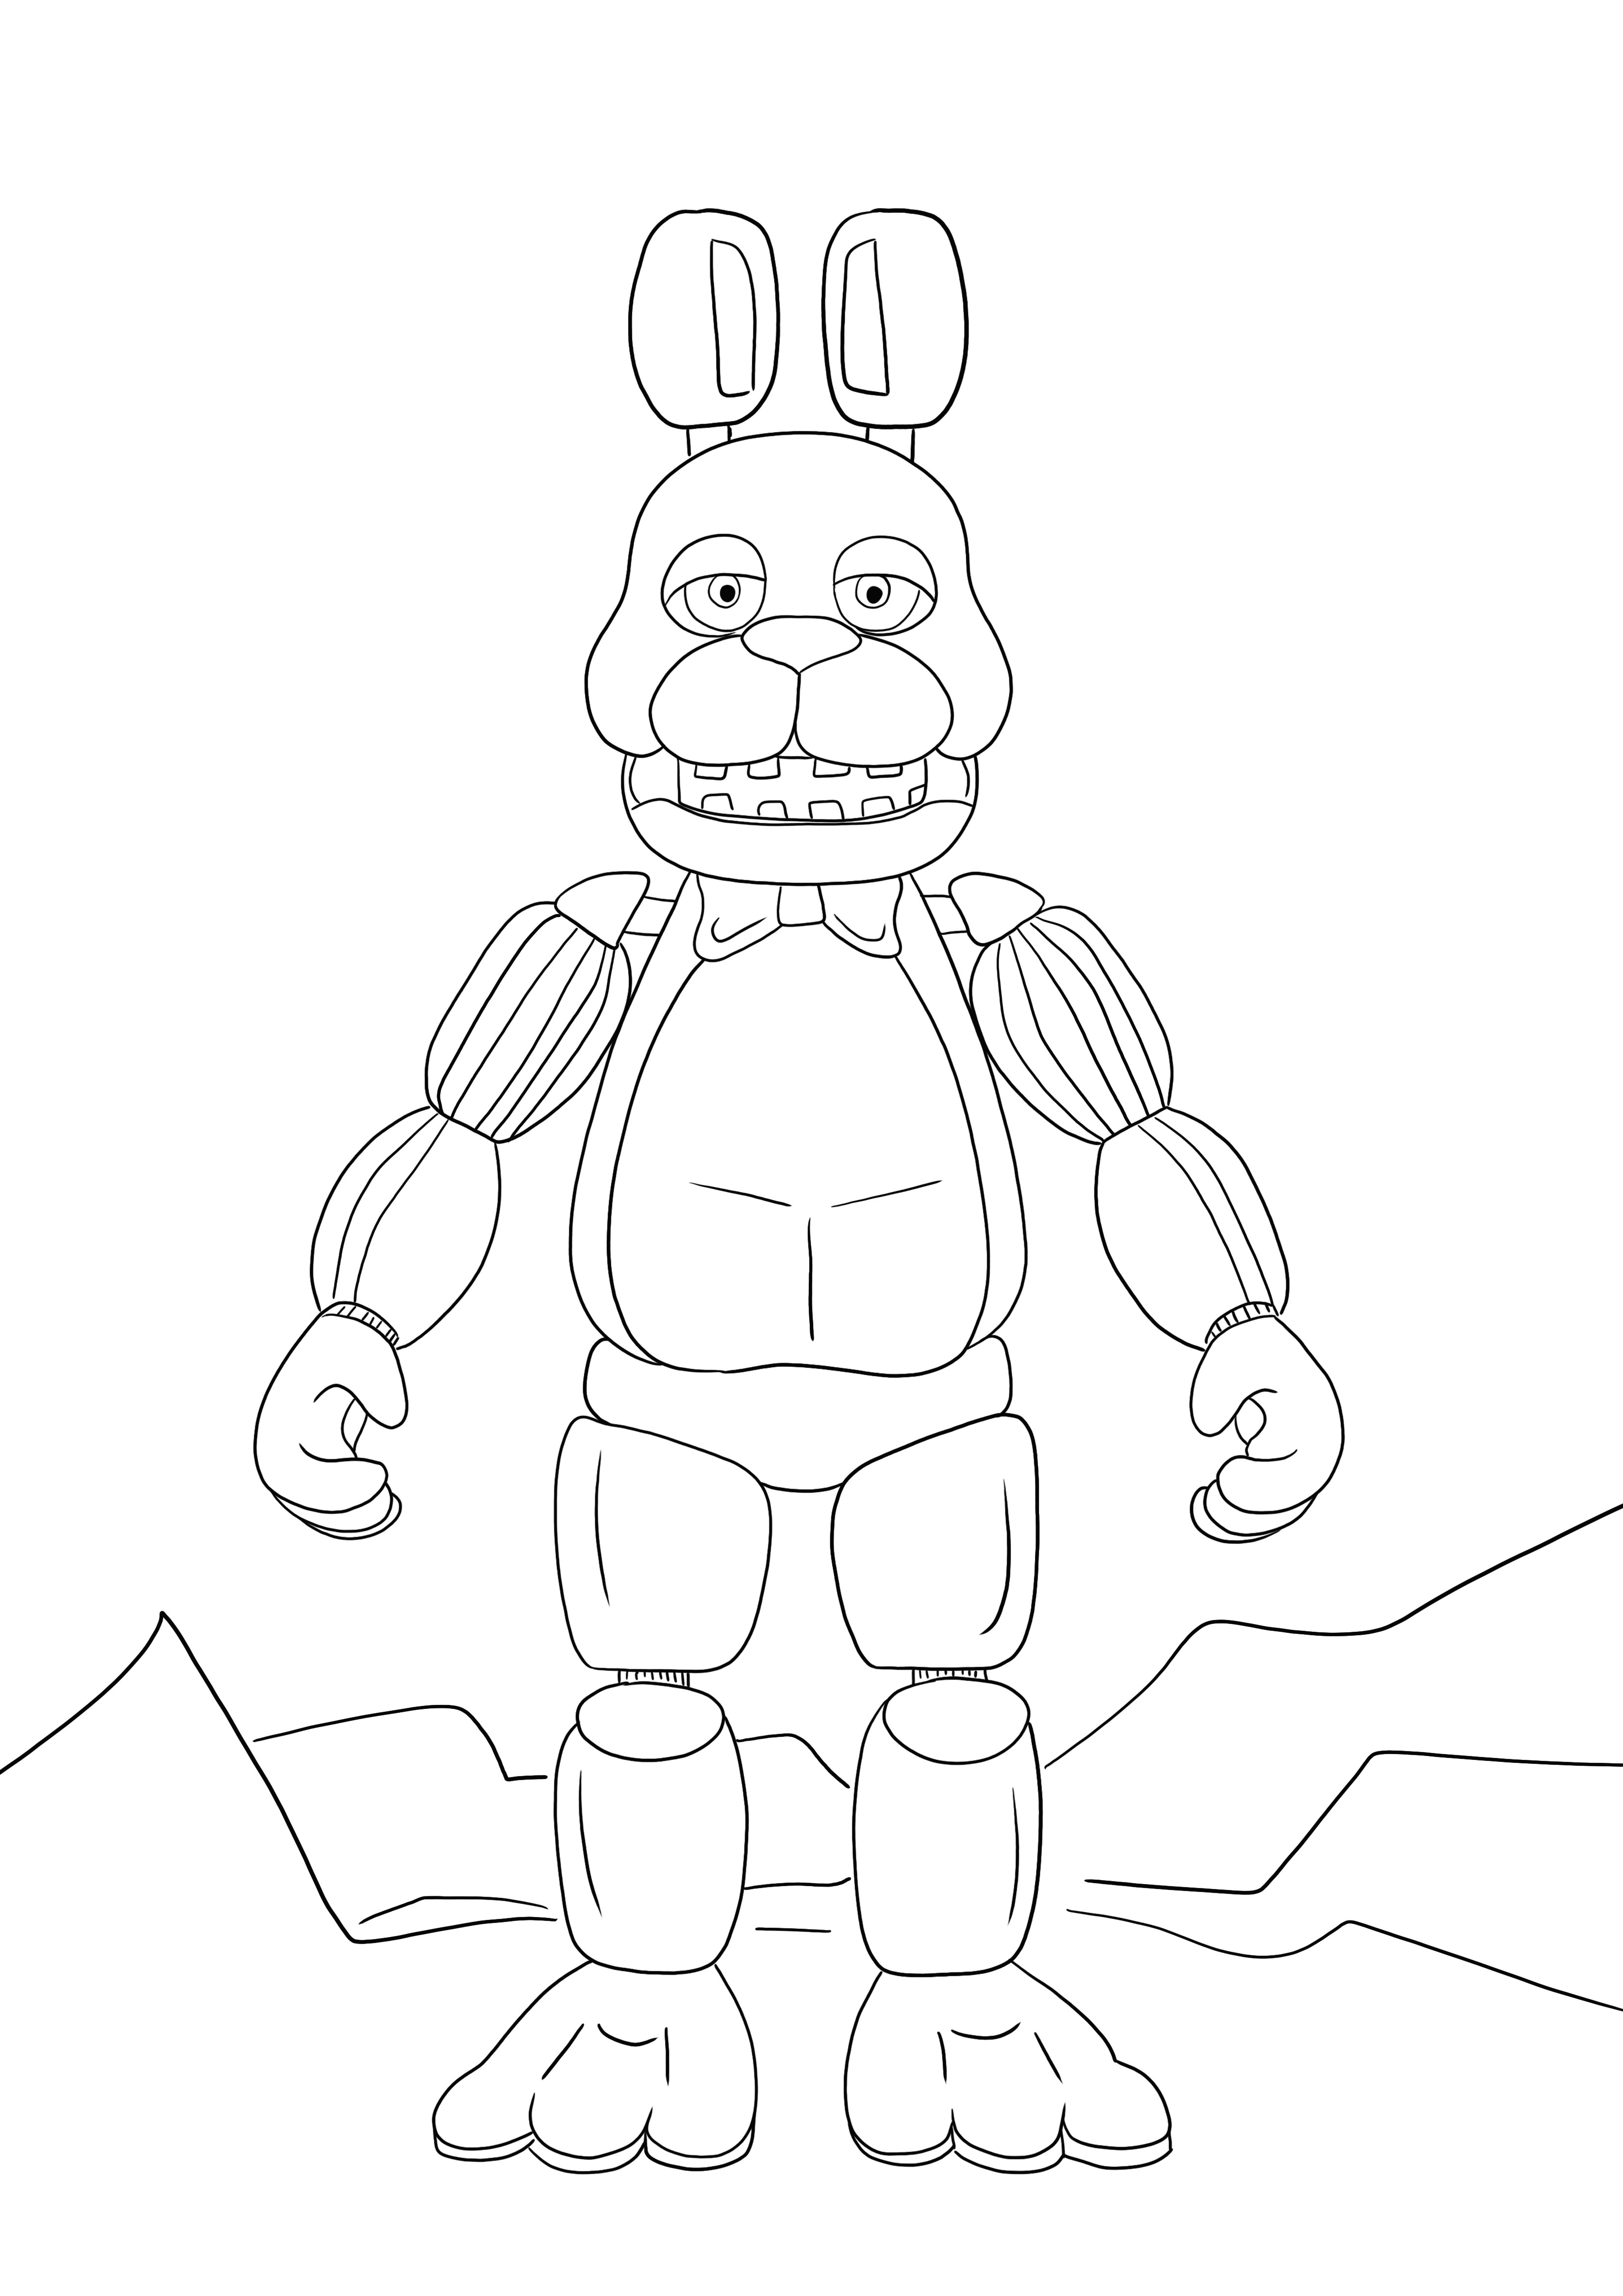 FNAF Toy Bonnie free printable page to color for kids of all ages